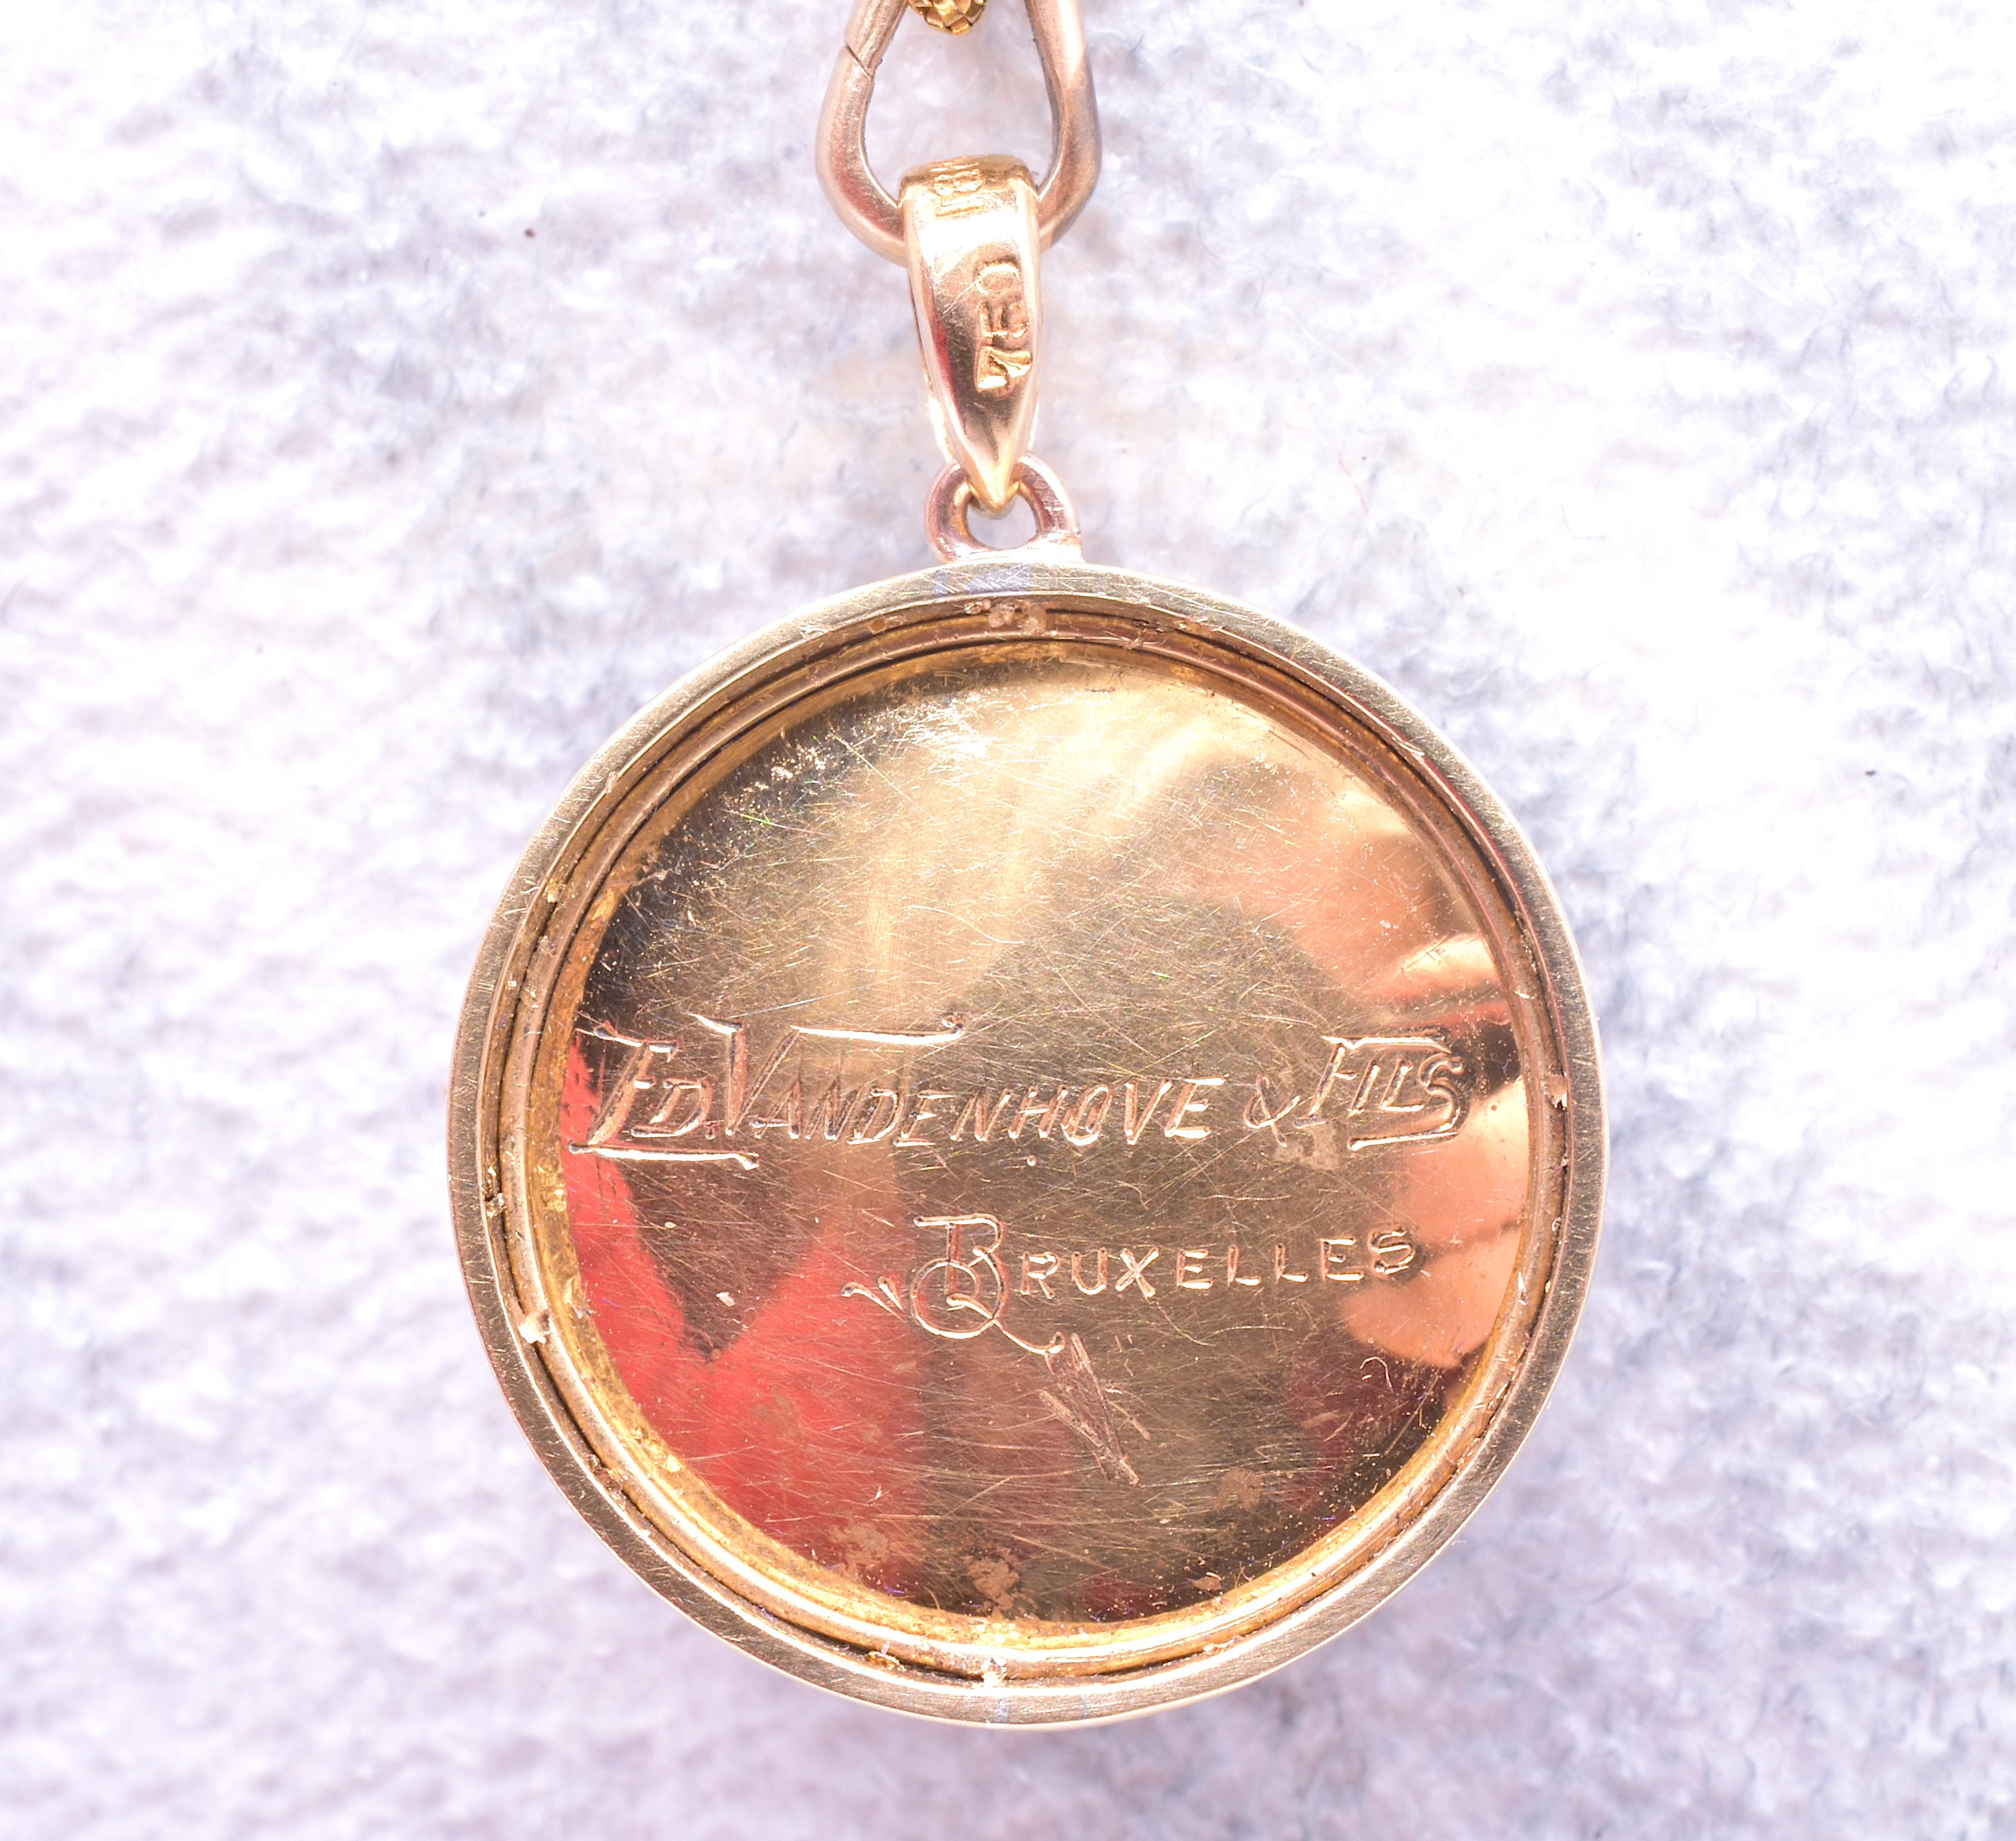 18 Karat Reverse Intaglio Crystal Pendant Depicting a Pekingese Dog, circa 1880 In Excellent Condition For Sale In Baltimore, MD